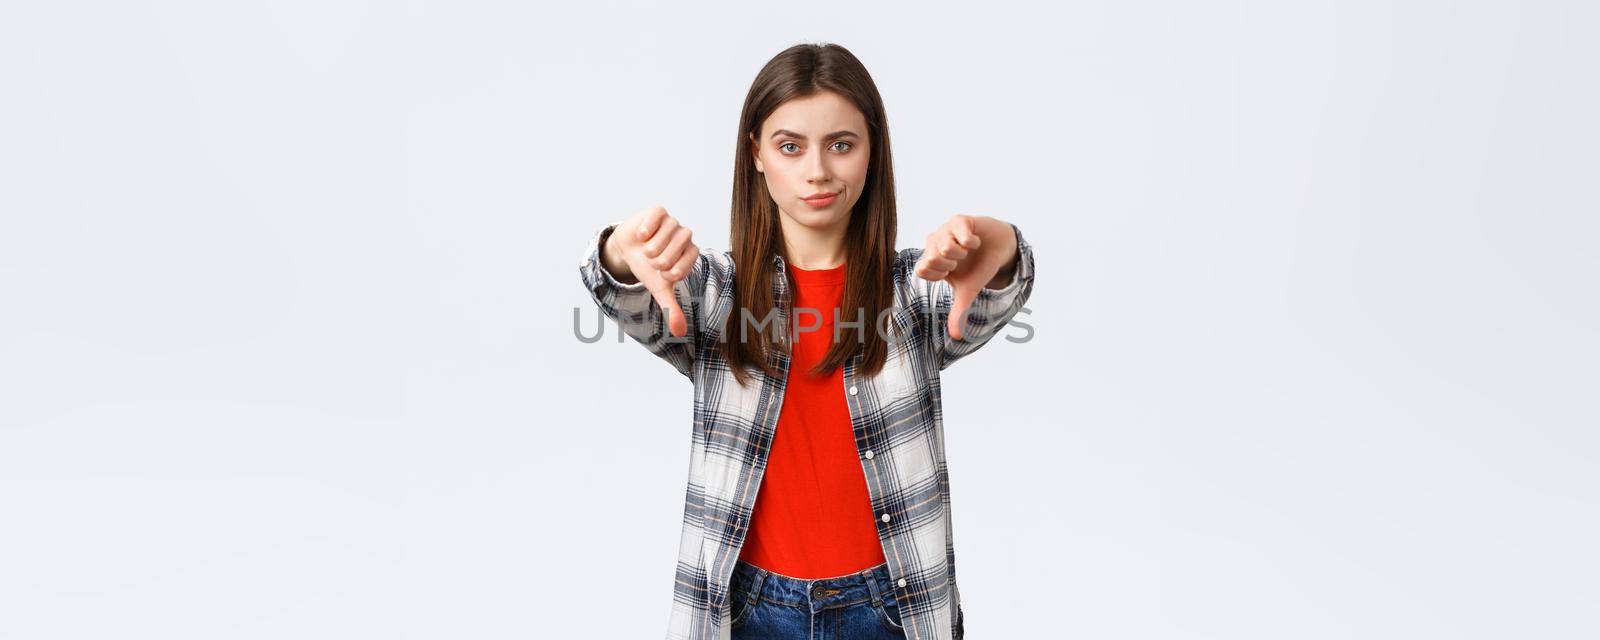 Lifestyle, different emotions, leisure activities concept. Skeptical and disappointed young woman smirk unsatisfied and showing thumbs-down in dislike, disapprova and judging bad product.